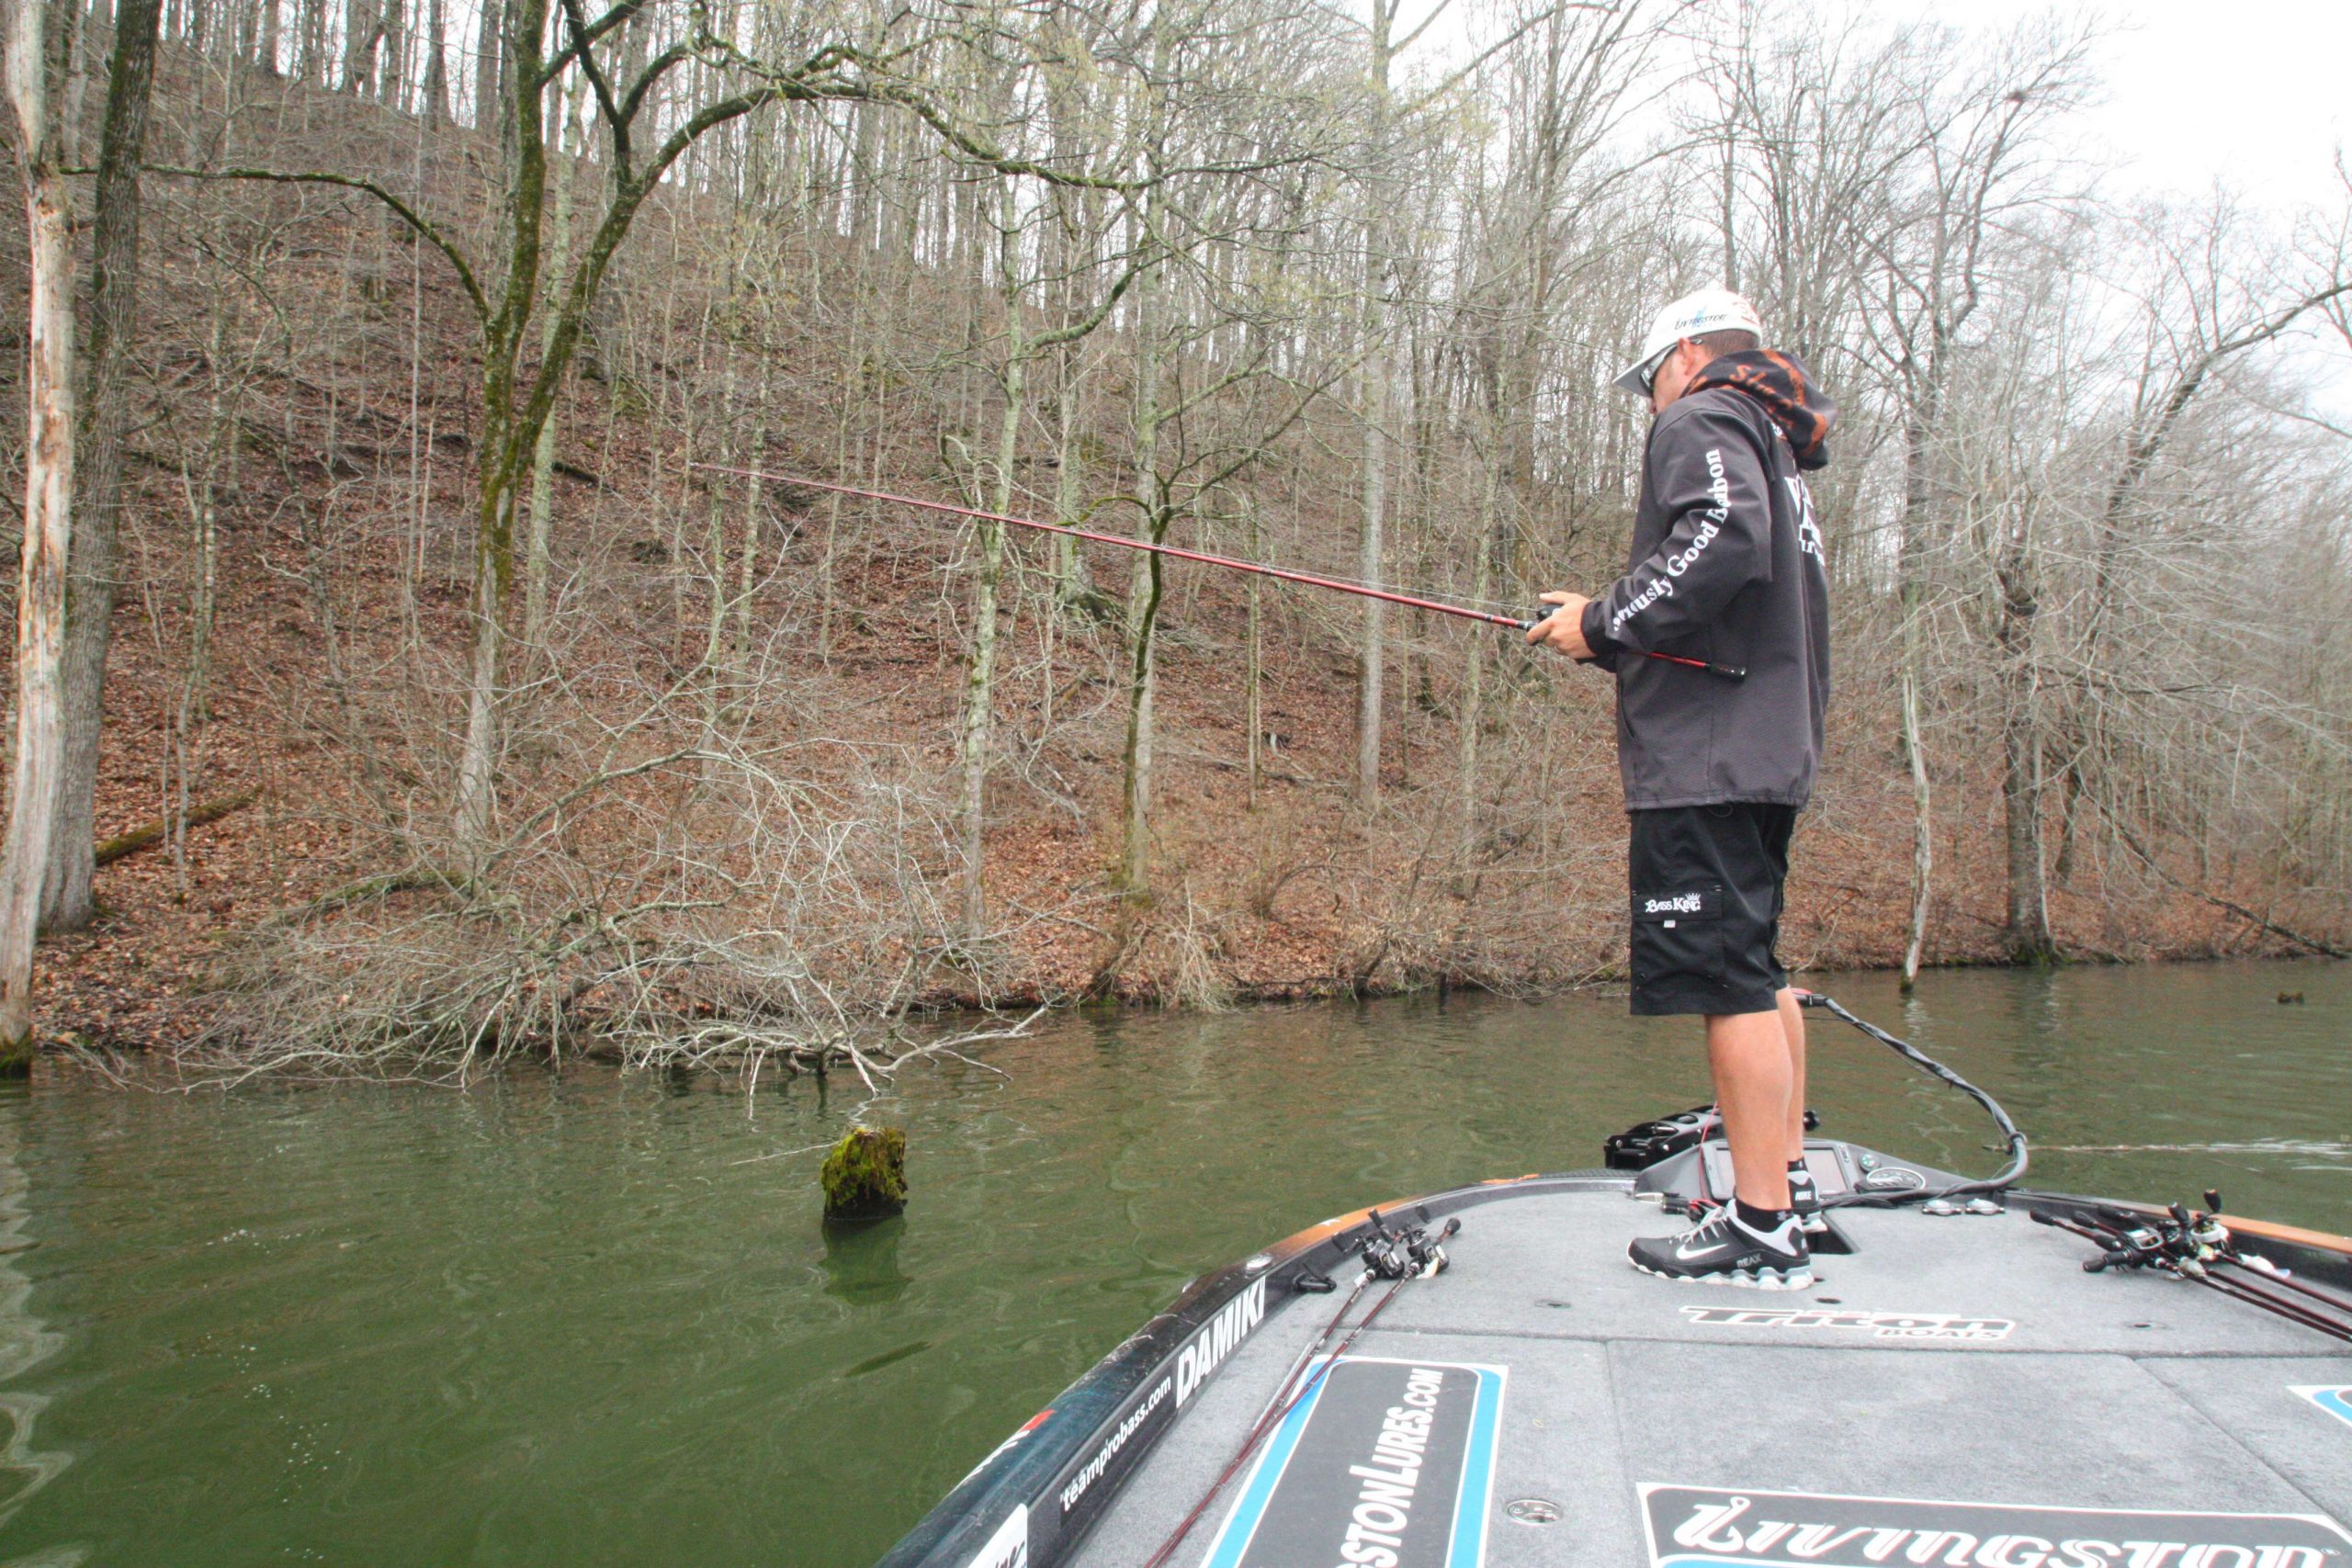 10:51 a.m. Cherry fishes a jig on a steep channel bank lined with submerged timber.